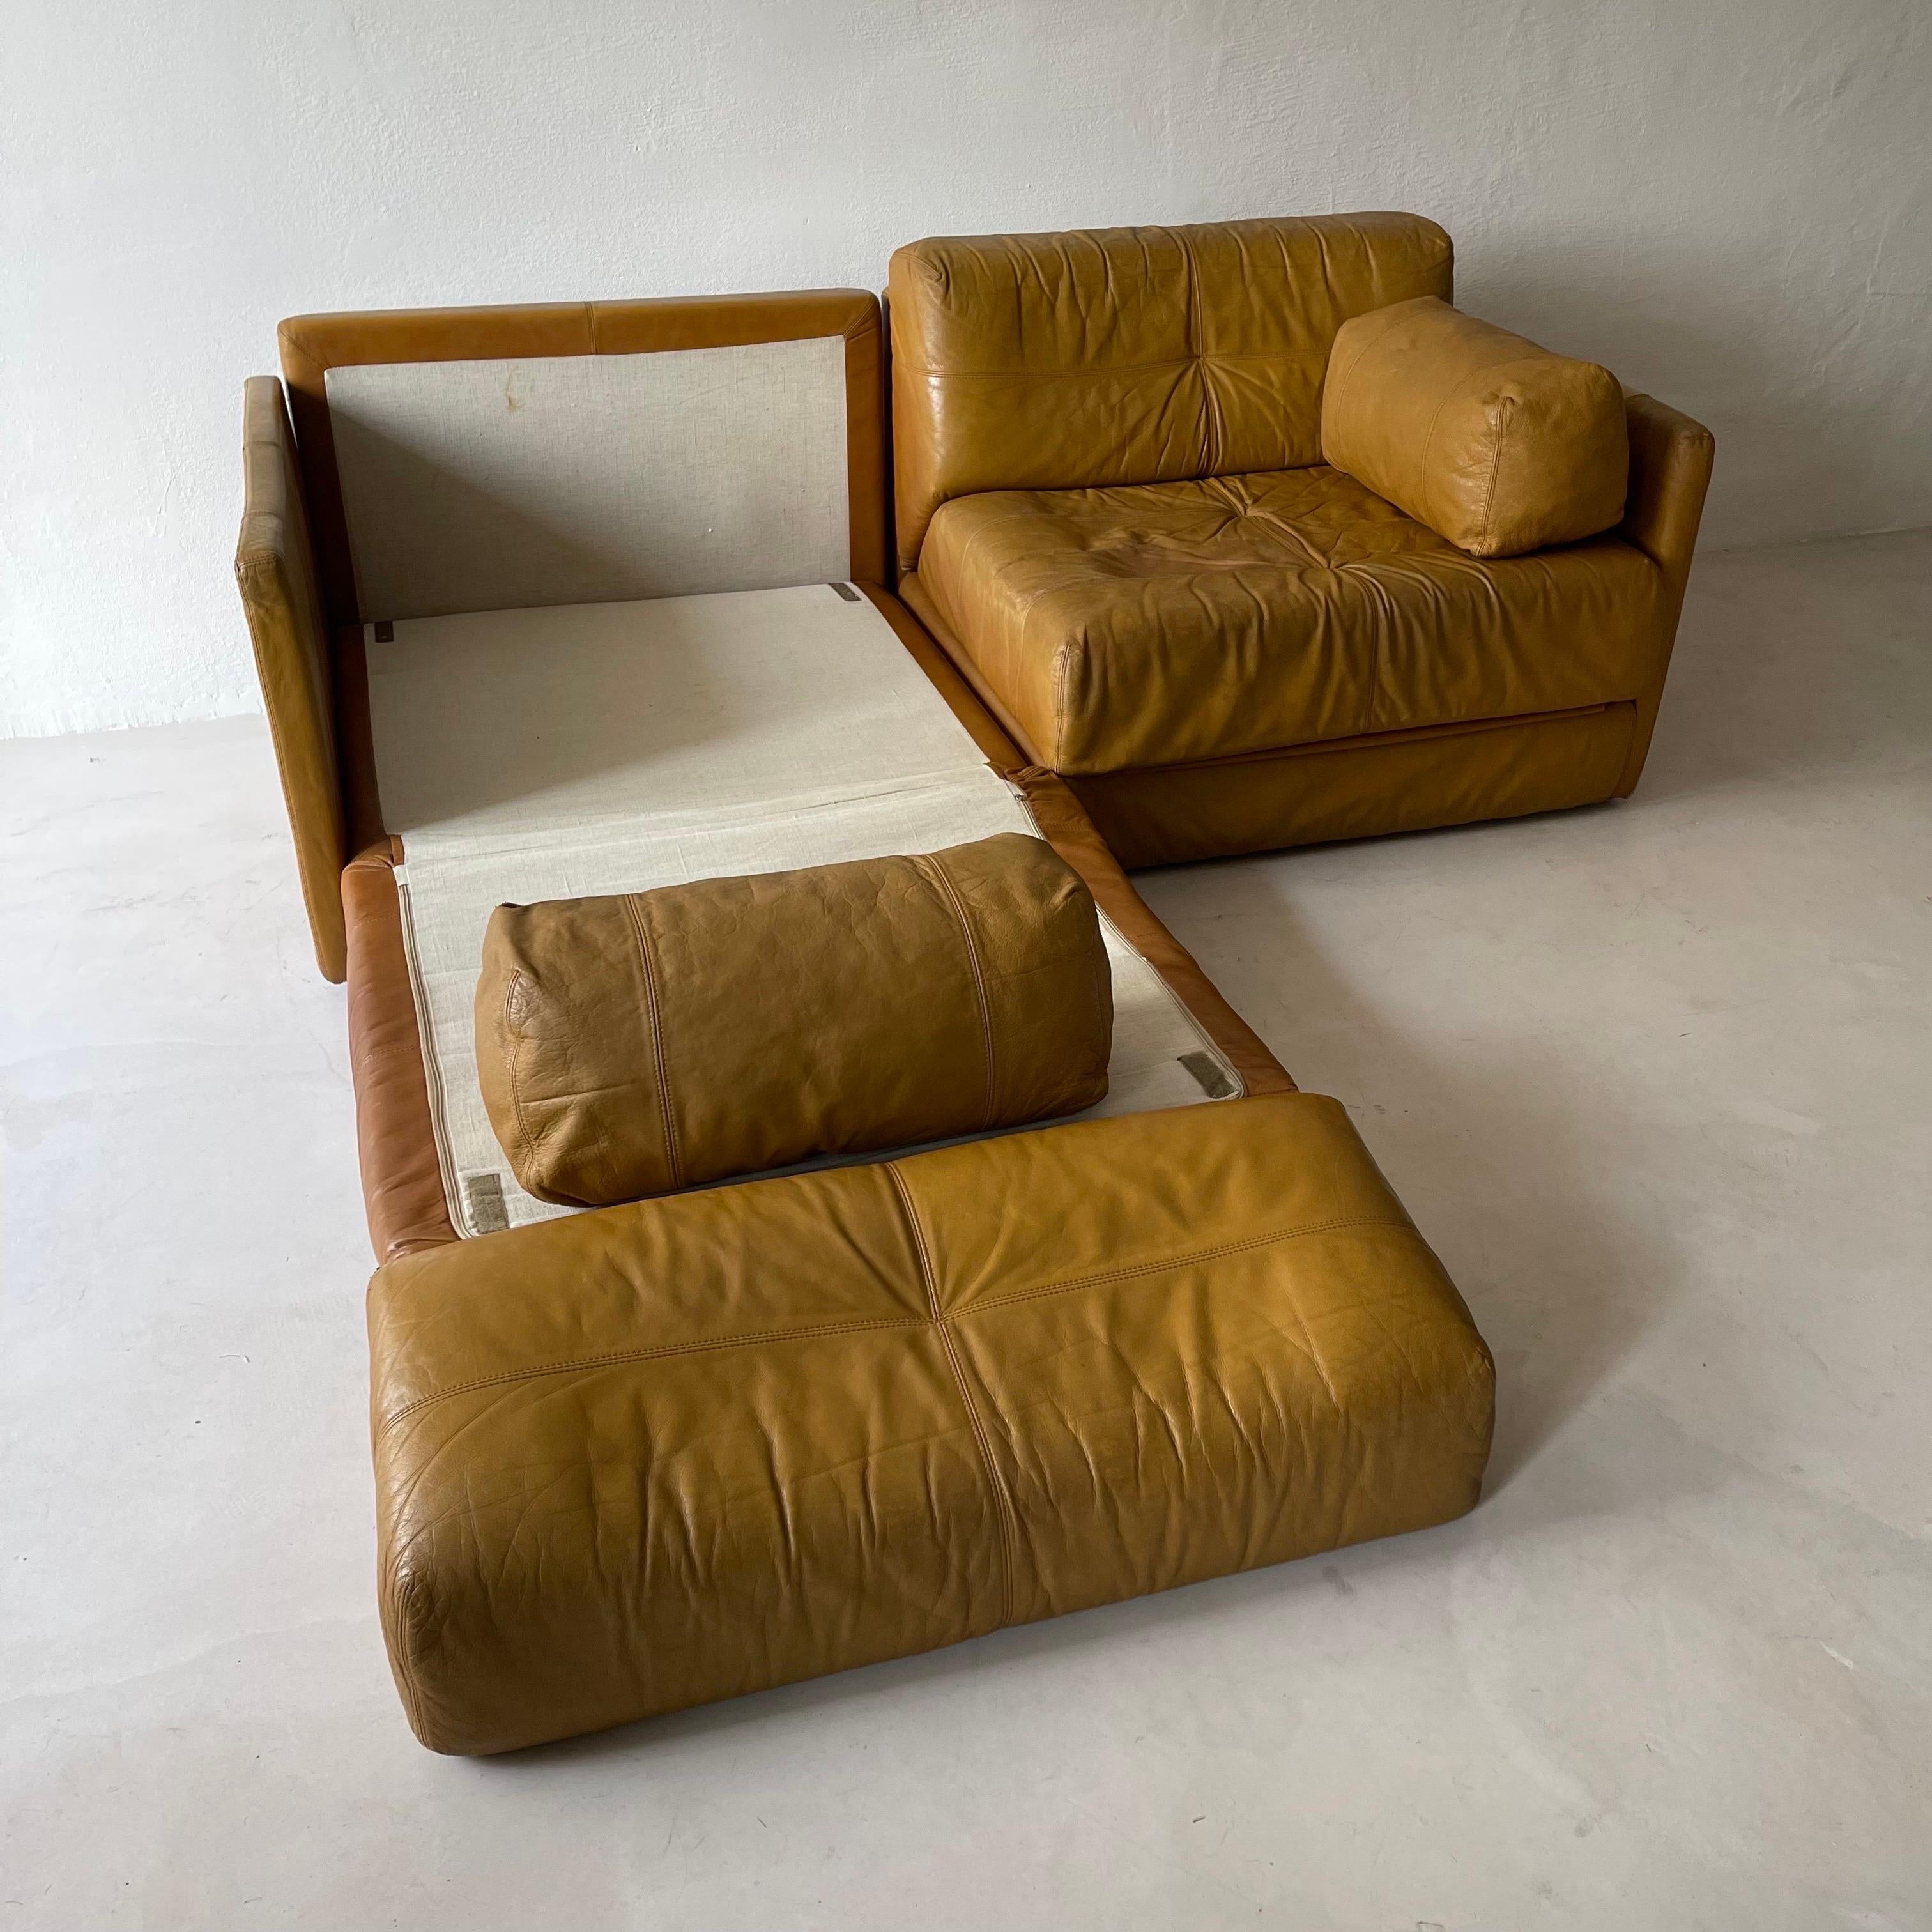 Wittmann Atrium Cognac Leather Daybed Sofa, 1970s For Sale 4